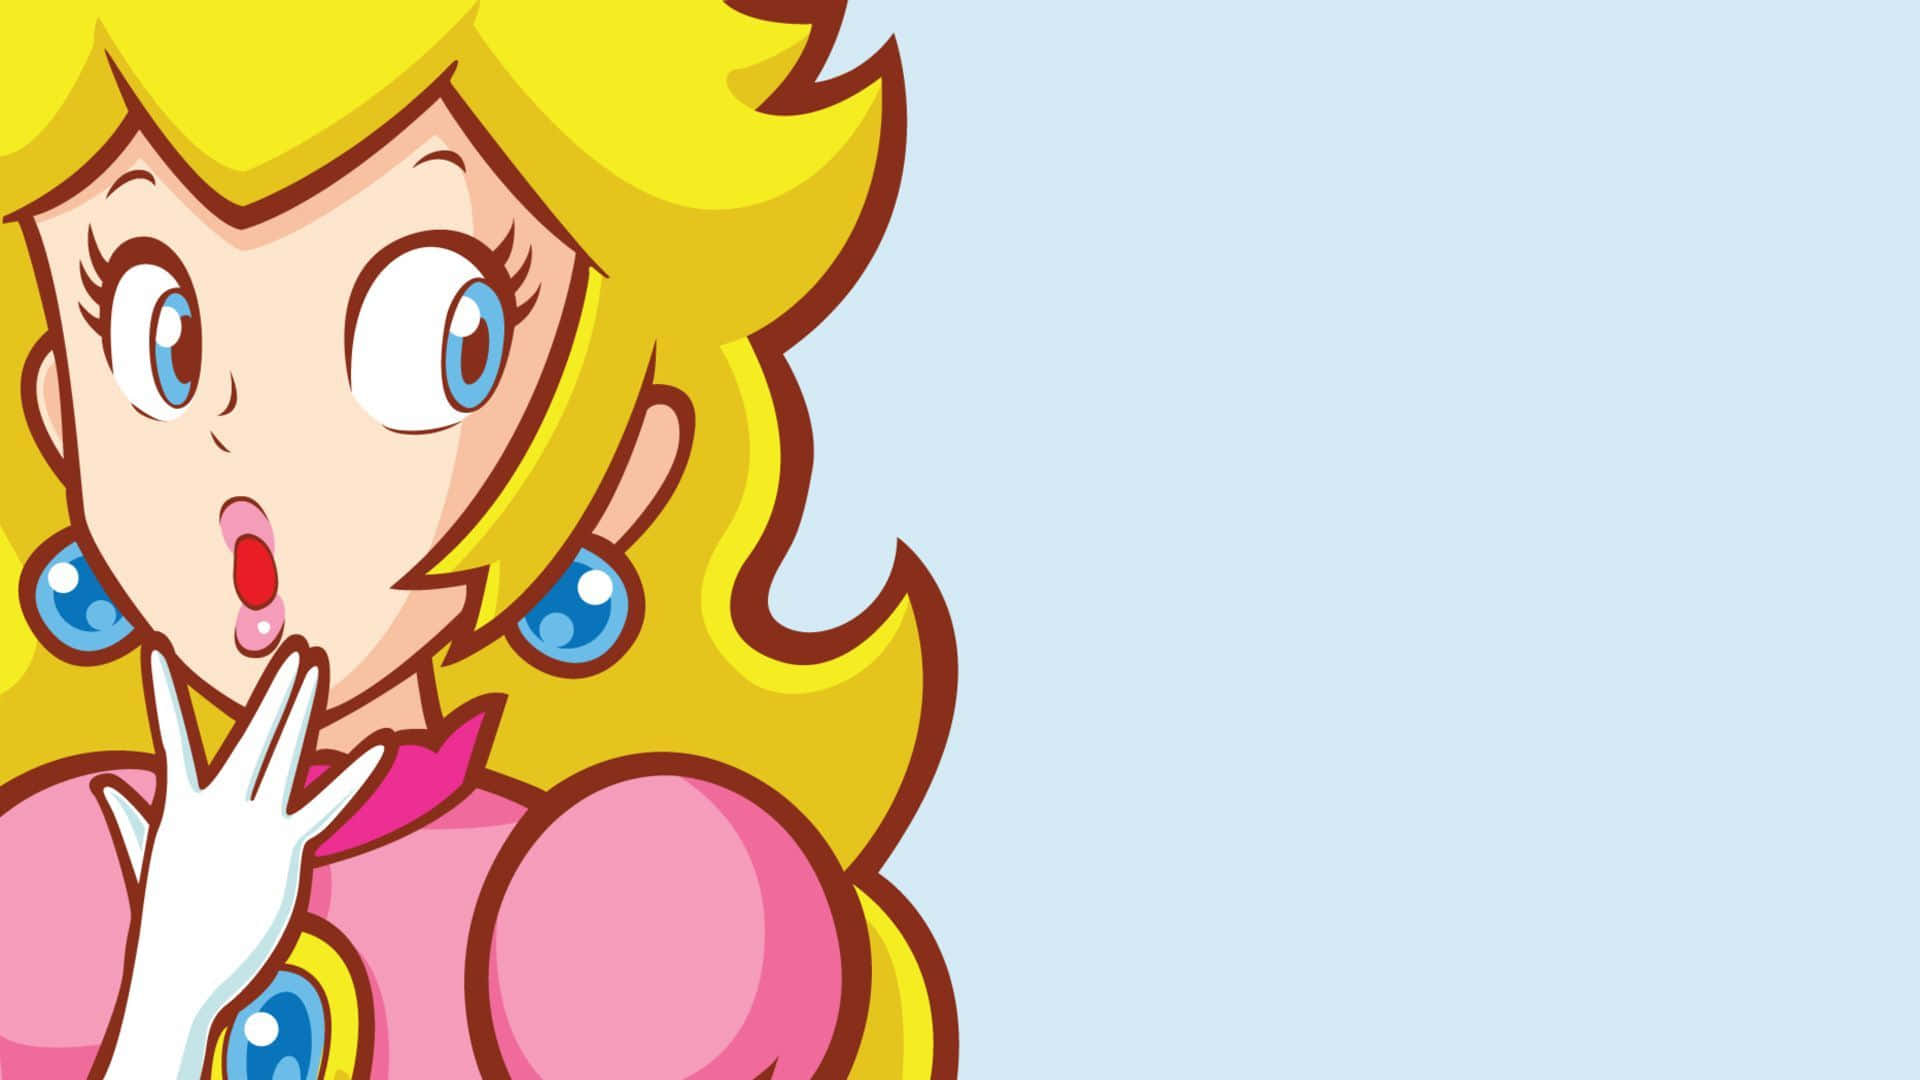 Download “Princess Peach, the leading character from the Mario series of video games” Wallpaper